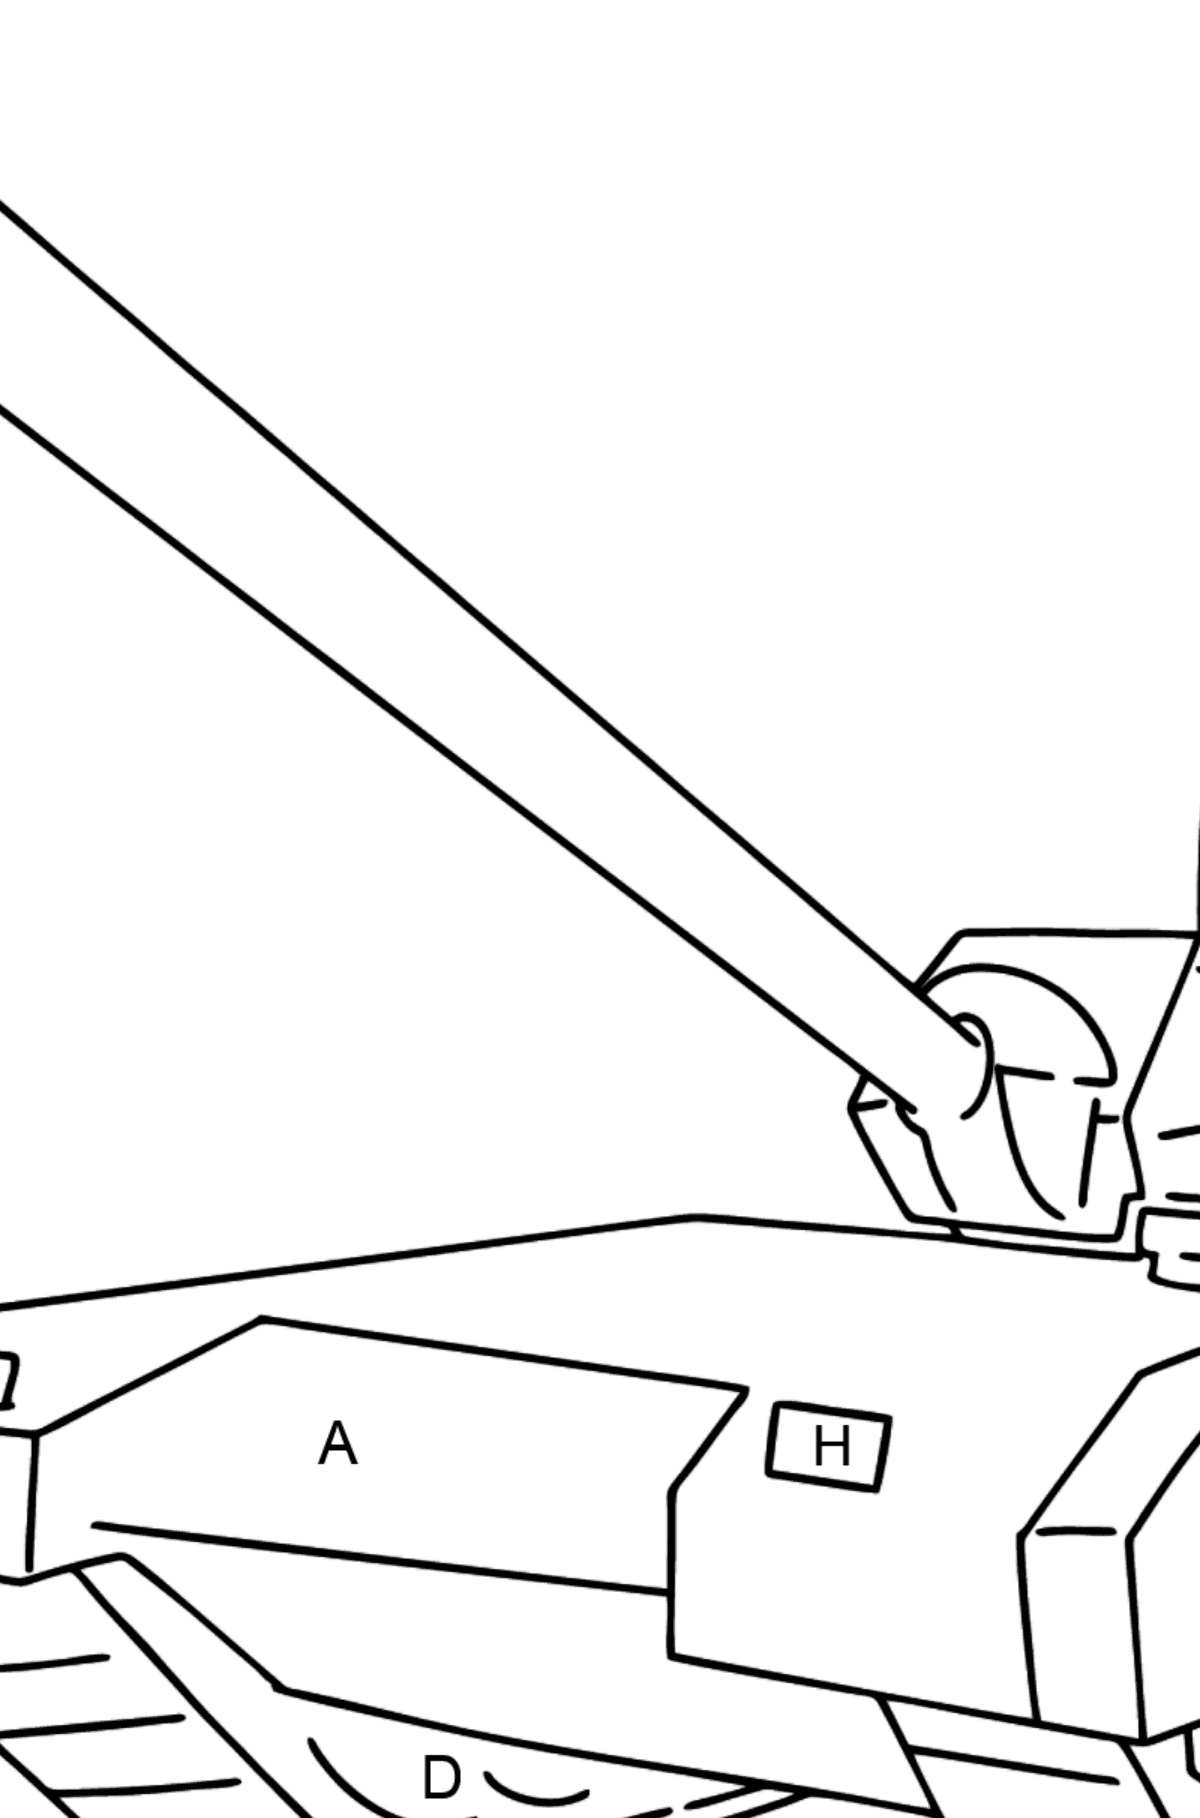 Armata Tank coloring page - Coloring by Letters for Kids